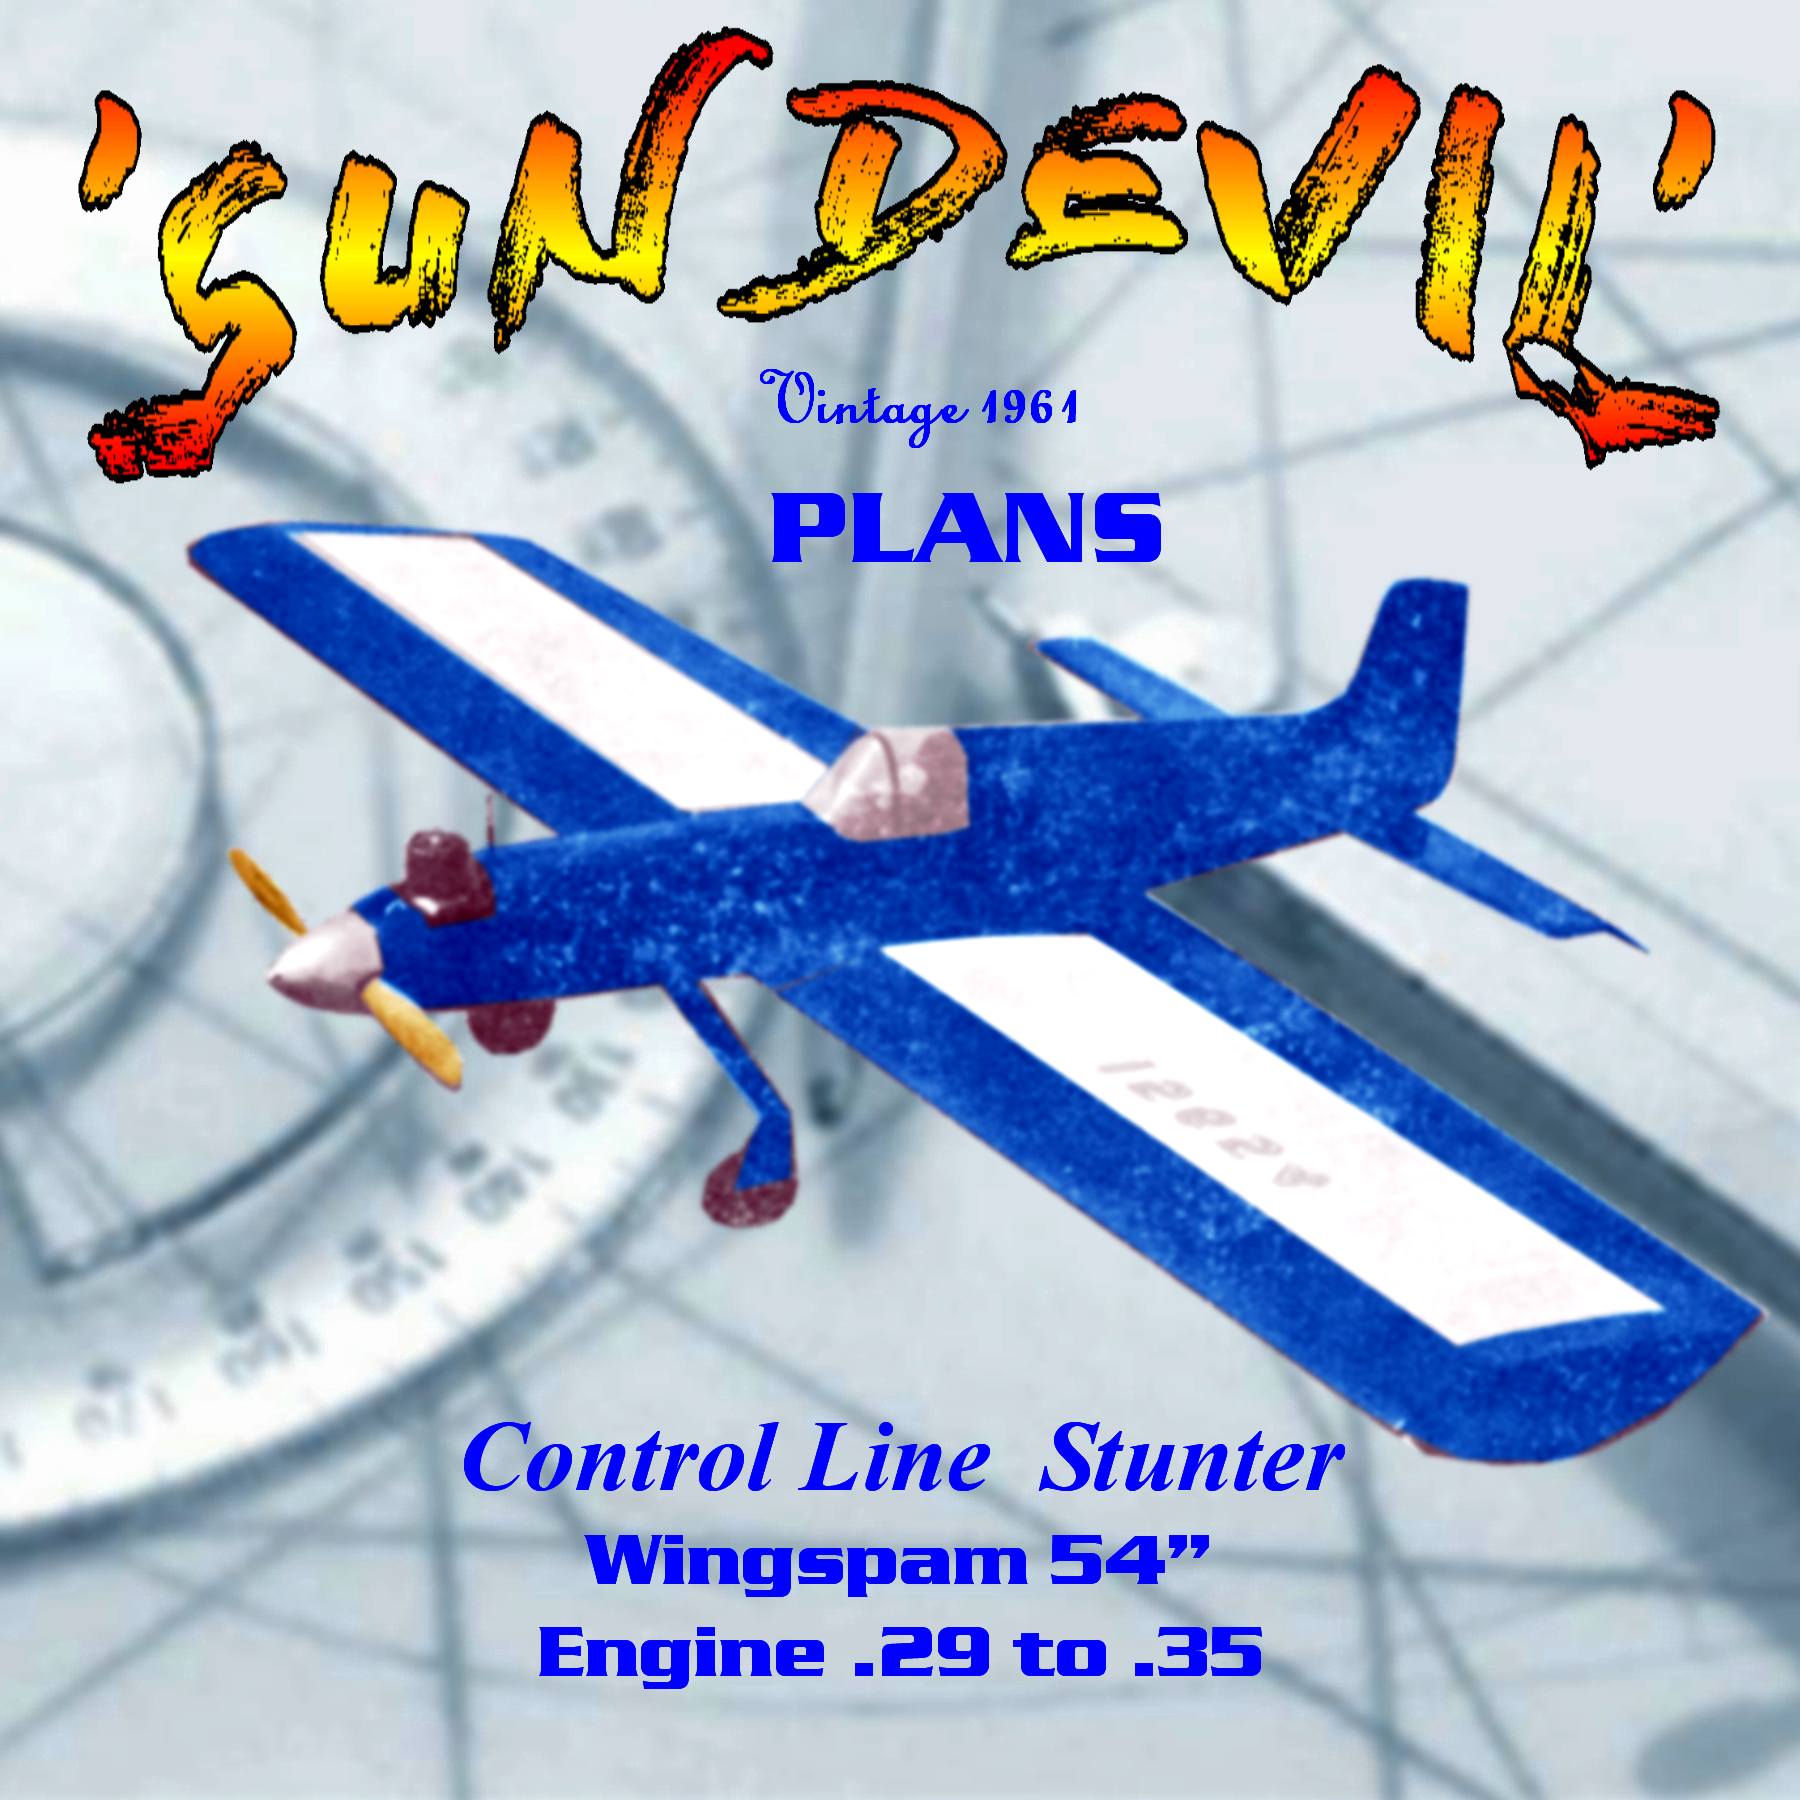 full size printed plans & article old time stunt 1961 control line 54"w/s .34 engine sun devil plans